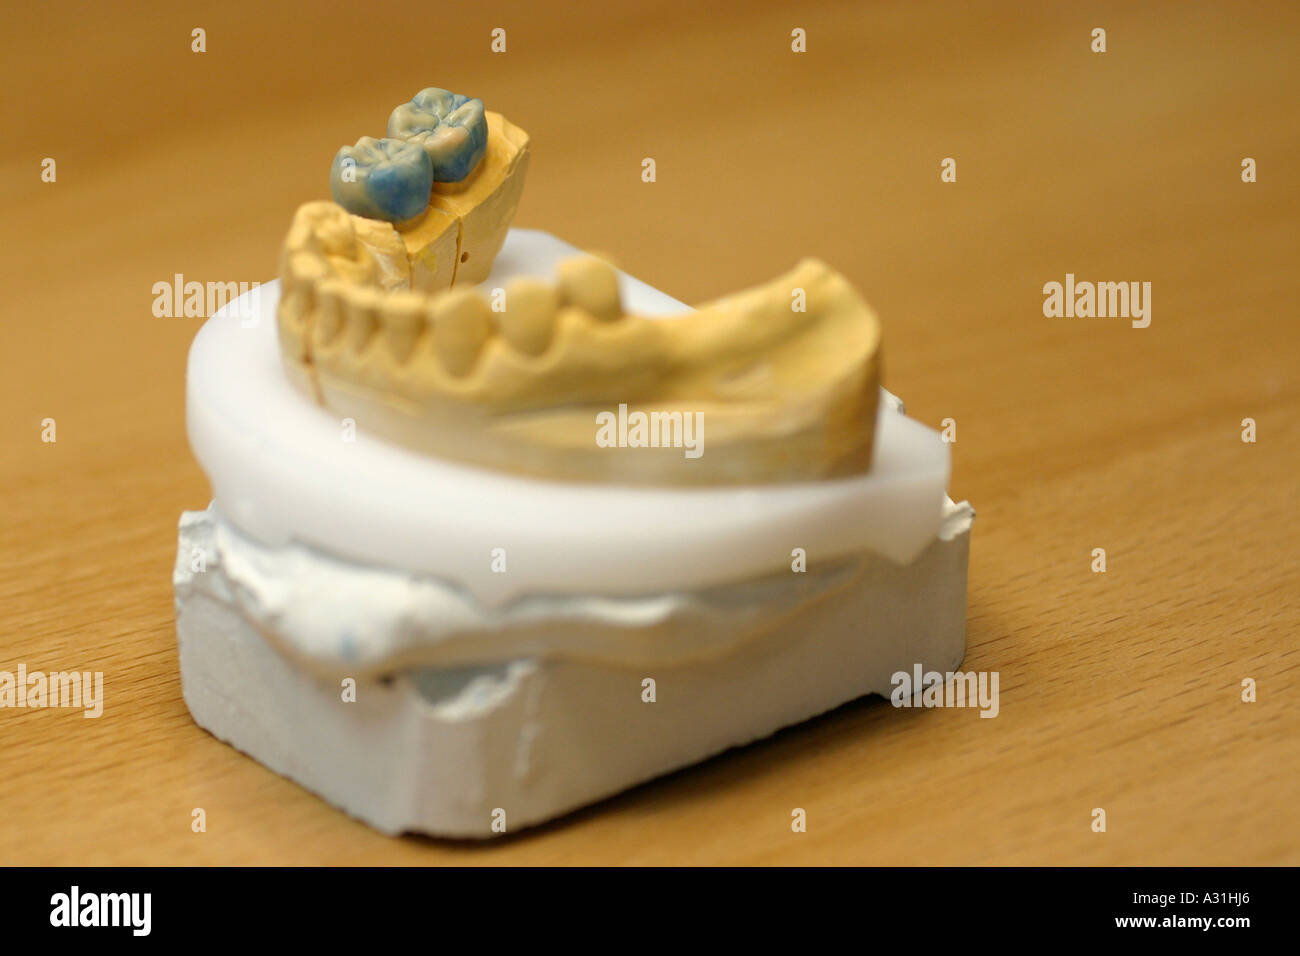 Yellow dental mould elevated view close up Stock Photo